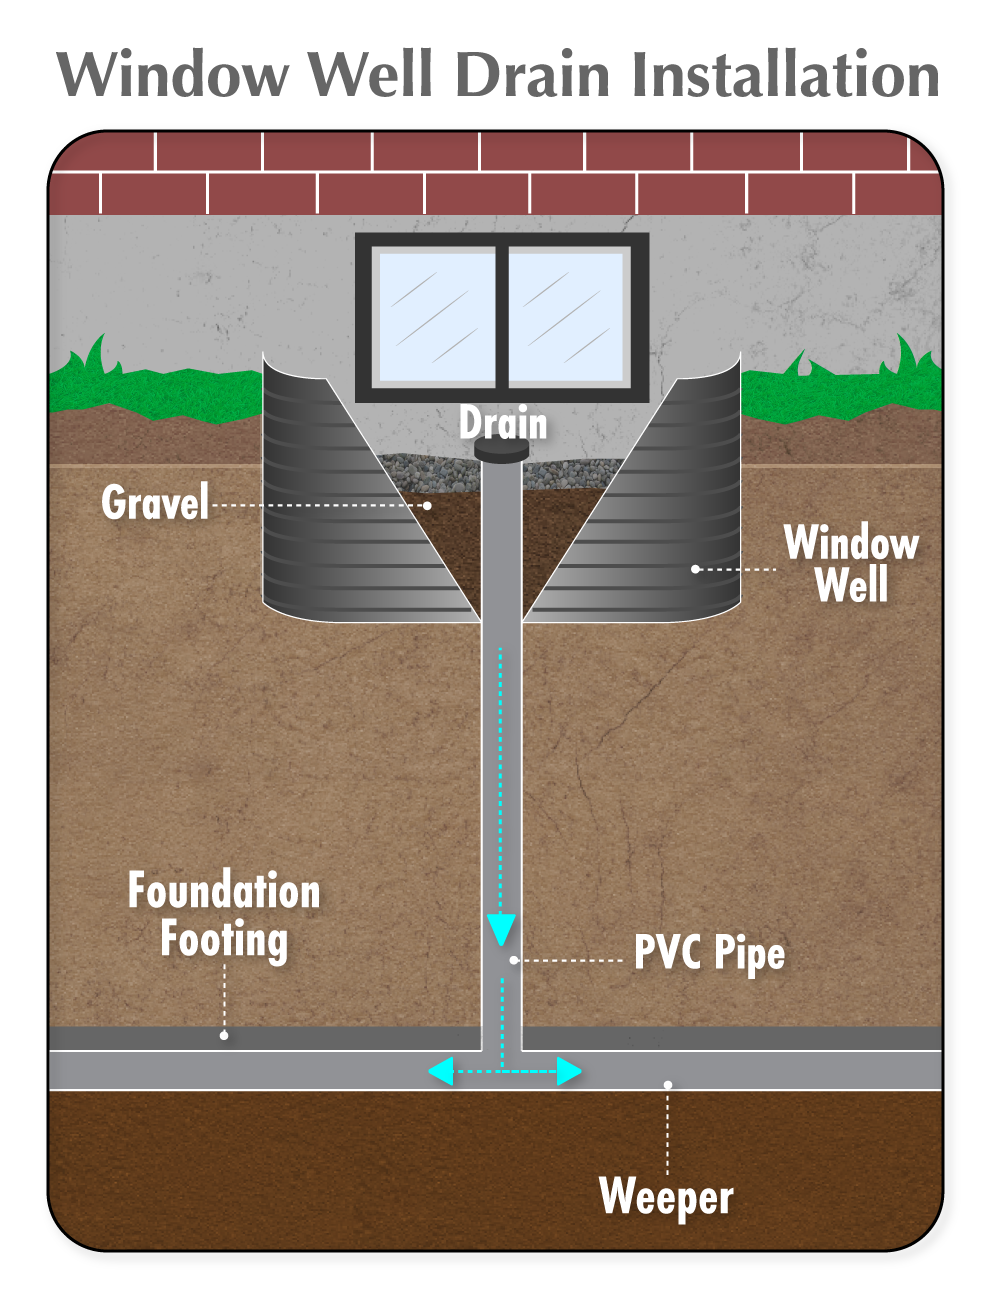 window well drainage system with a drain, gravel, the  window well itself, PVC piping and foundation footing